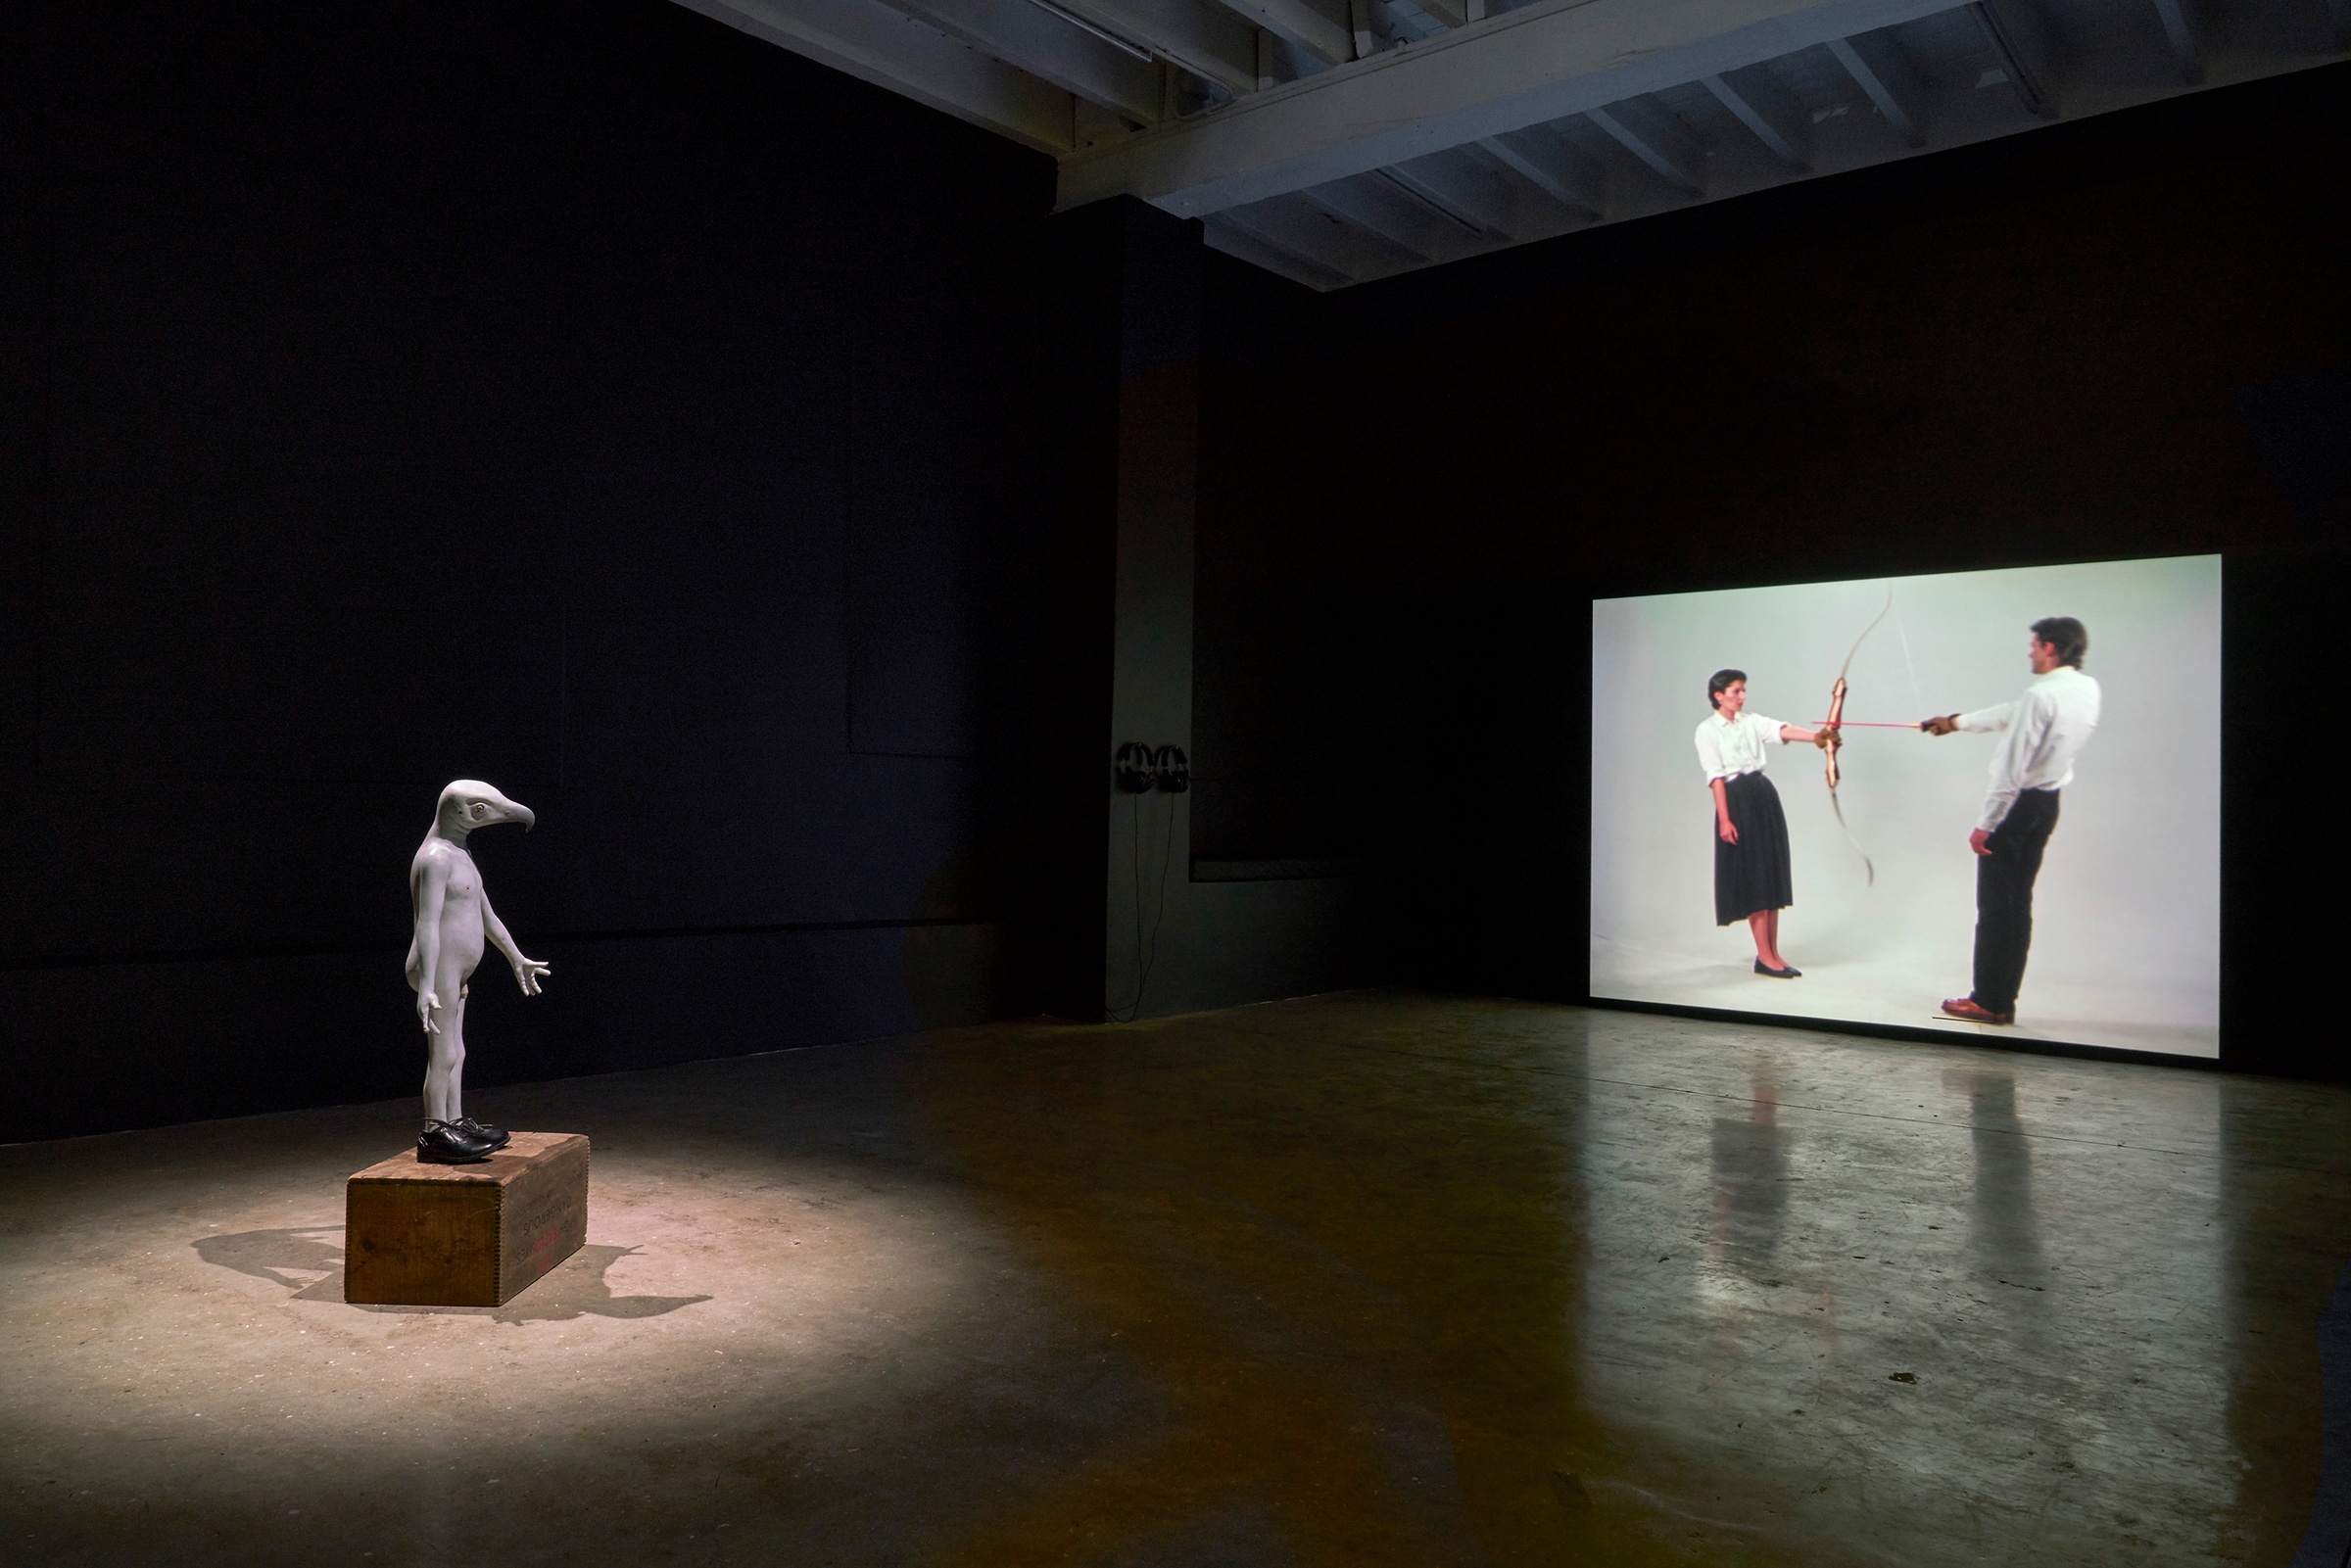 Installation photograph from the ‘Risk’ exhibition in A4’s Gallery. On the left, Jane Alexander’s sculpture ‘Security Bird’ sits under a spotlight. On the right, Ulay and Marina Abramović’s performance video ‘Rest Energy’ is projected onto the wall.
